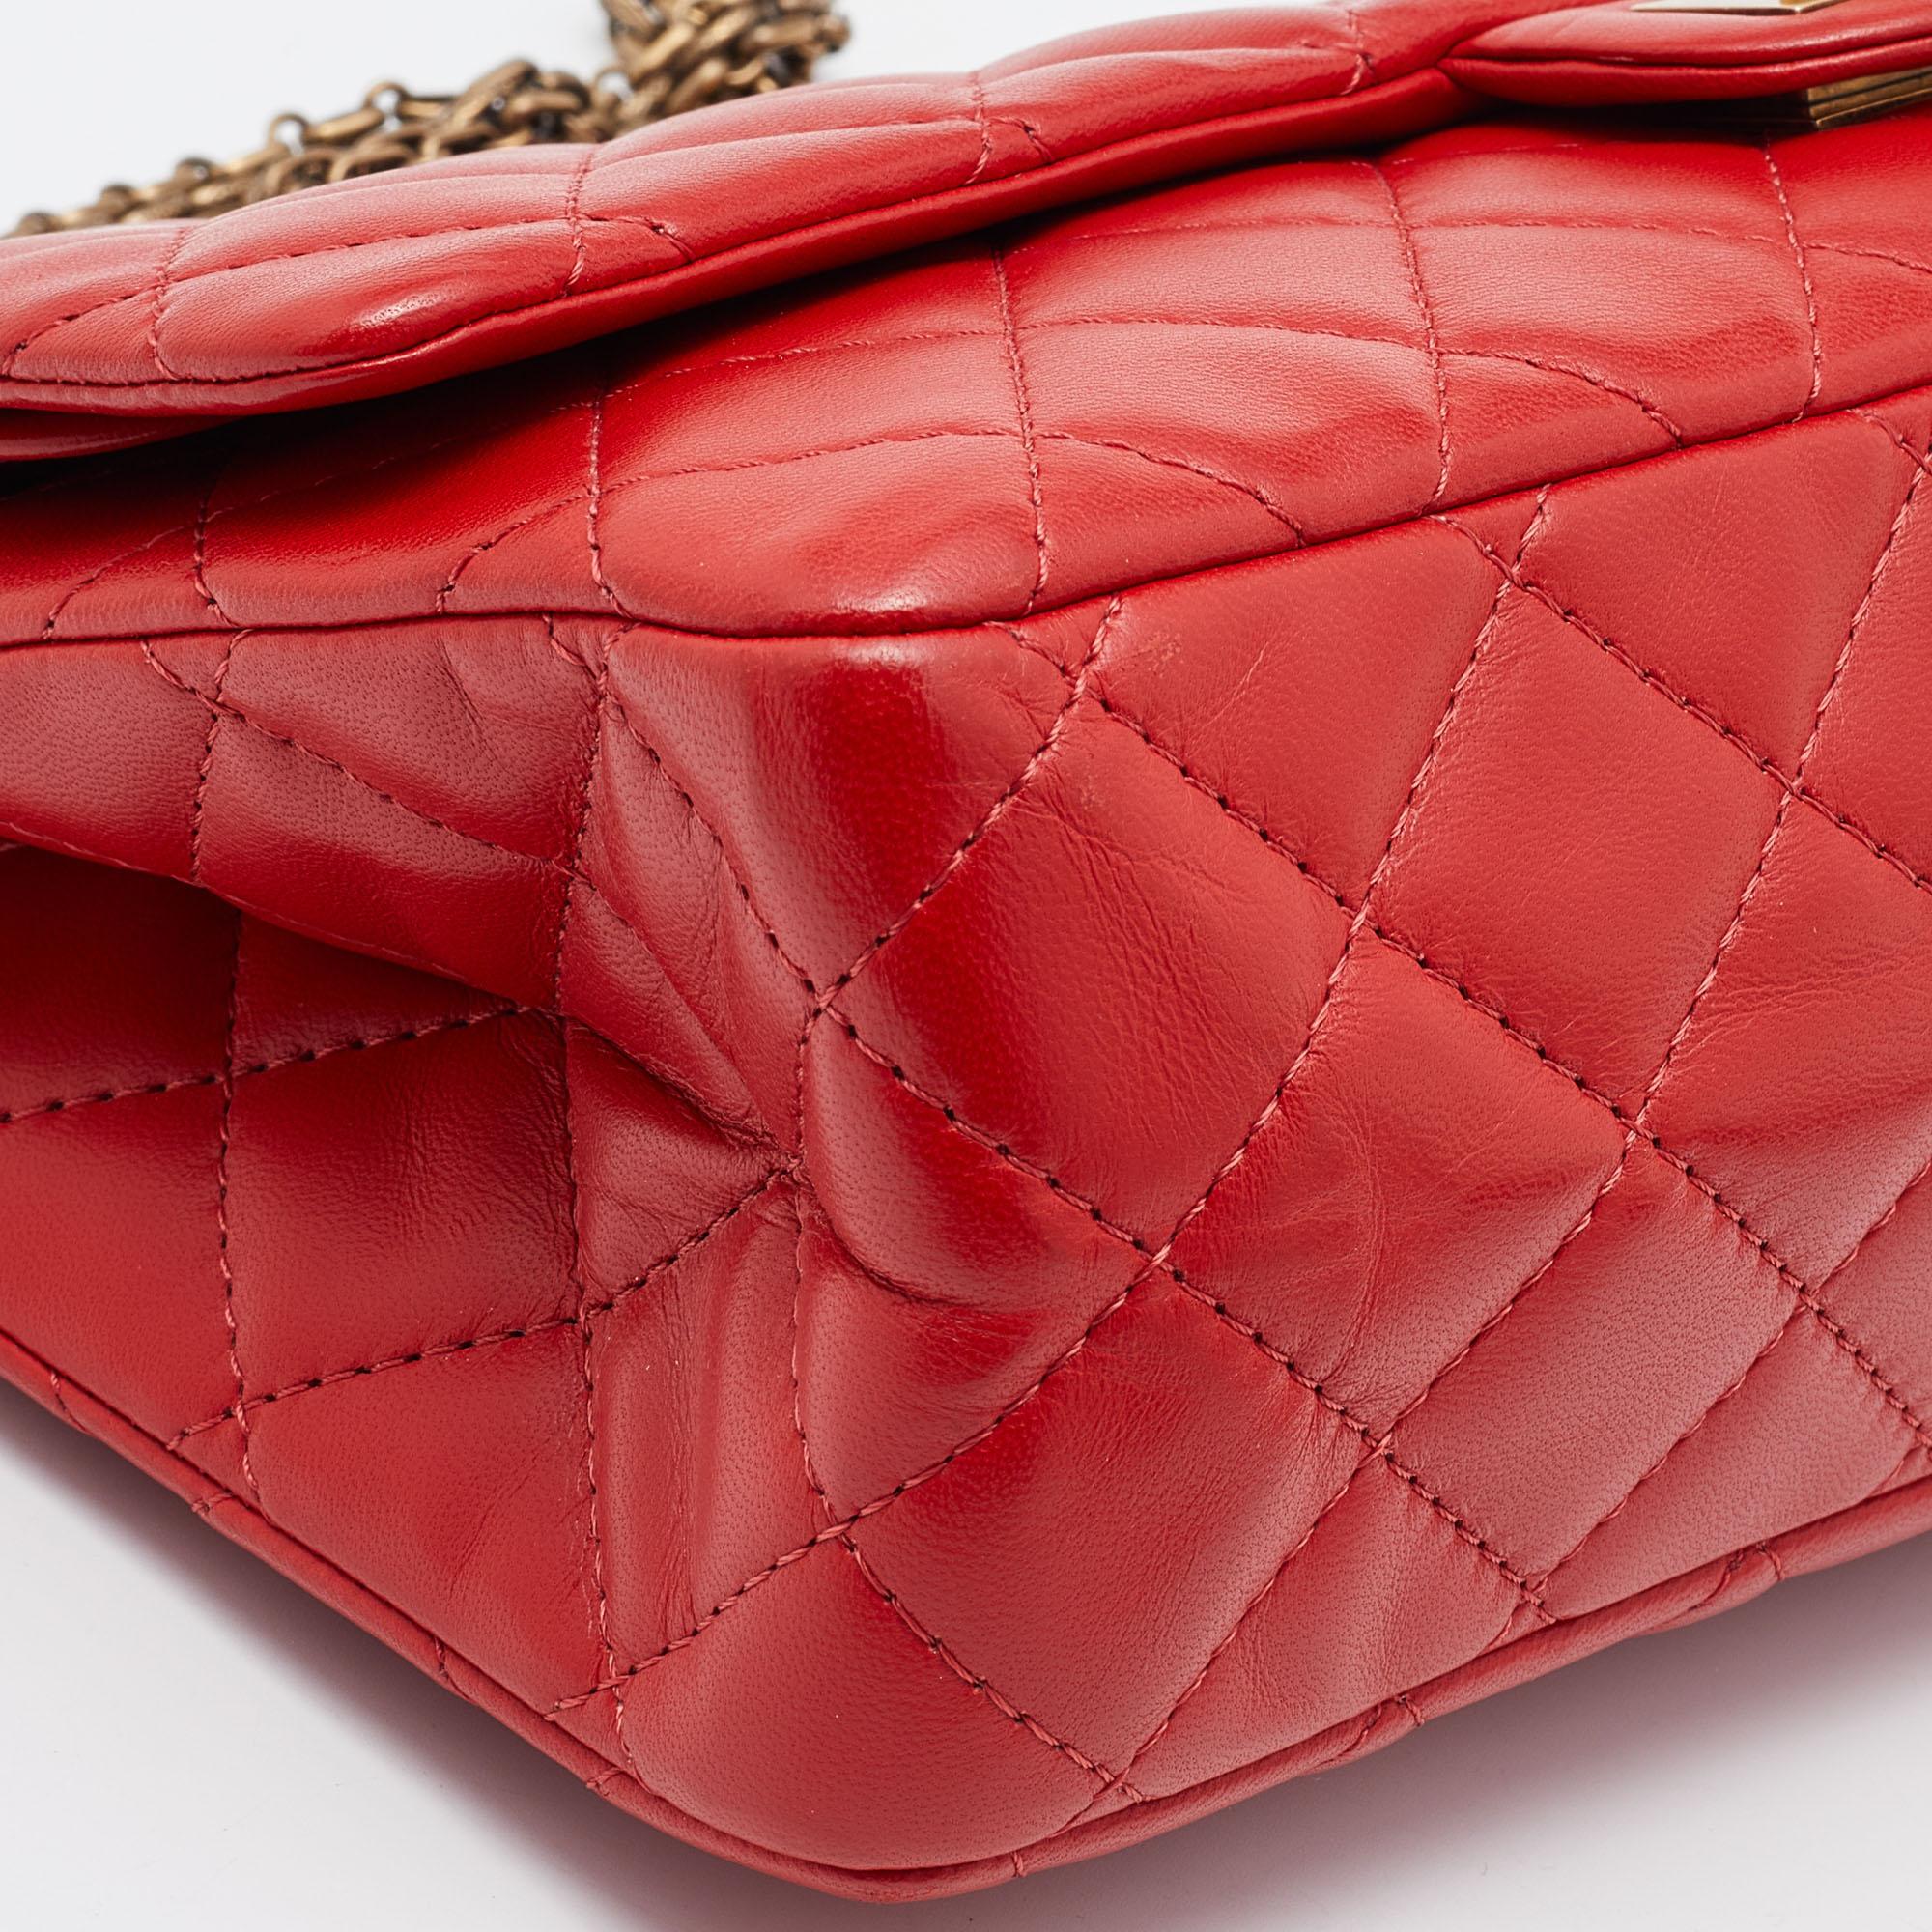 Chanel Red Lipstick Quilted Leather Reissue 2.55 Classic 226 Flap Bag 2